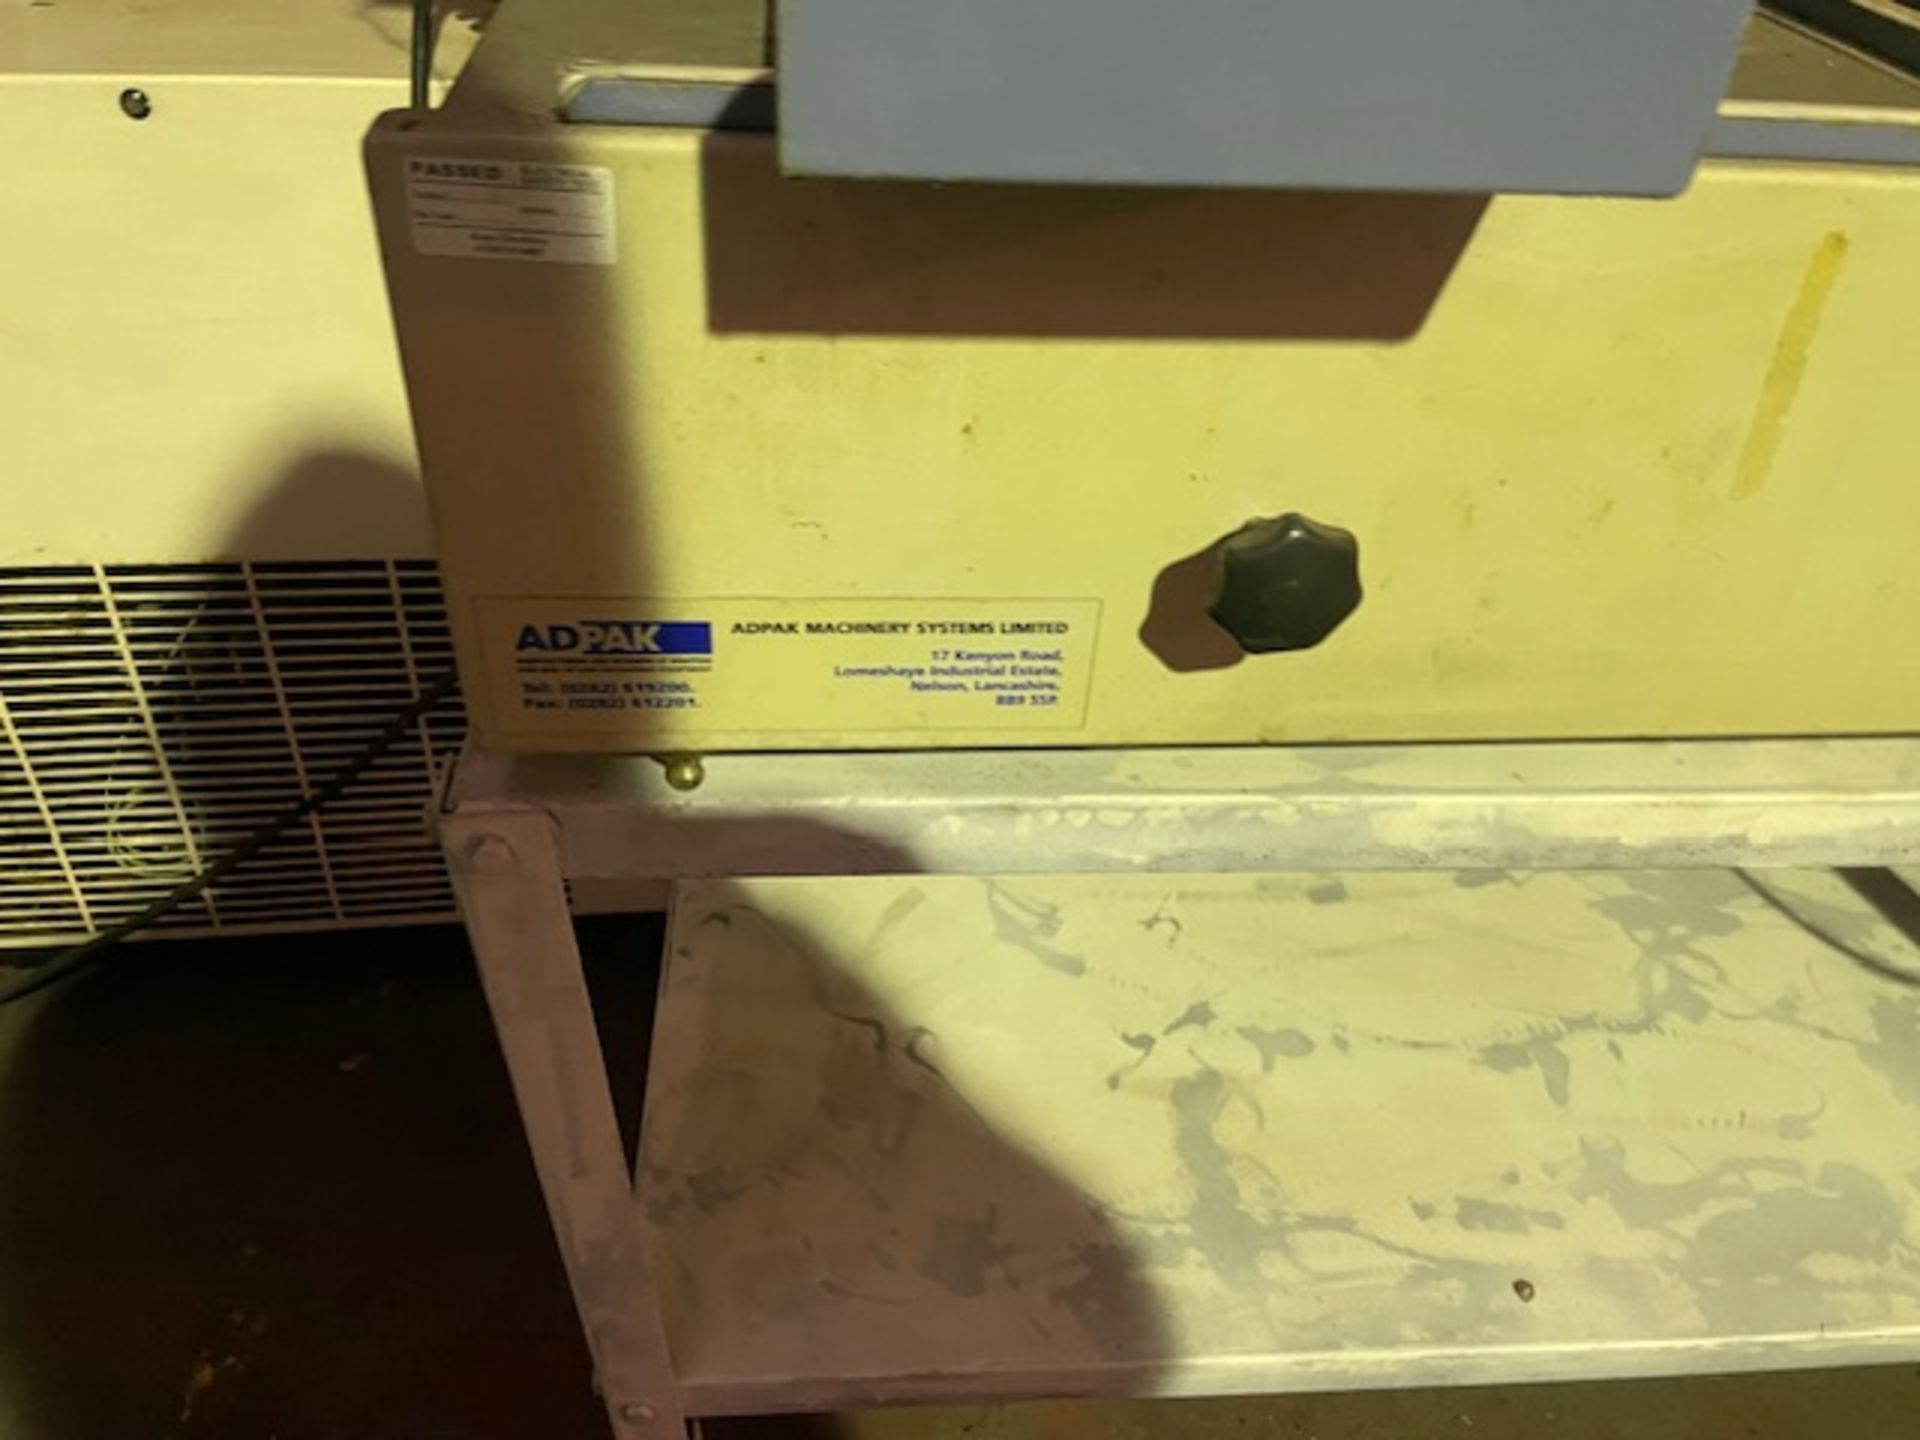 Heat sealing machine for sealing bags along with elevator for moving package on has been sat around - Image 5 of 6